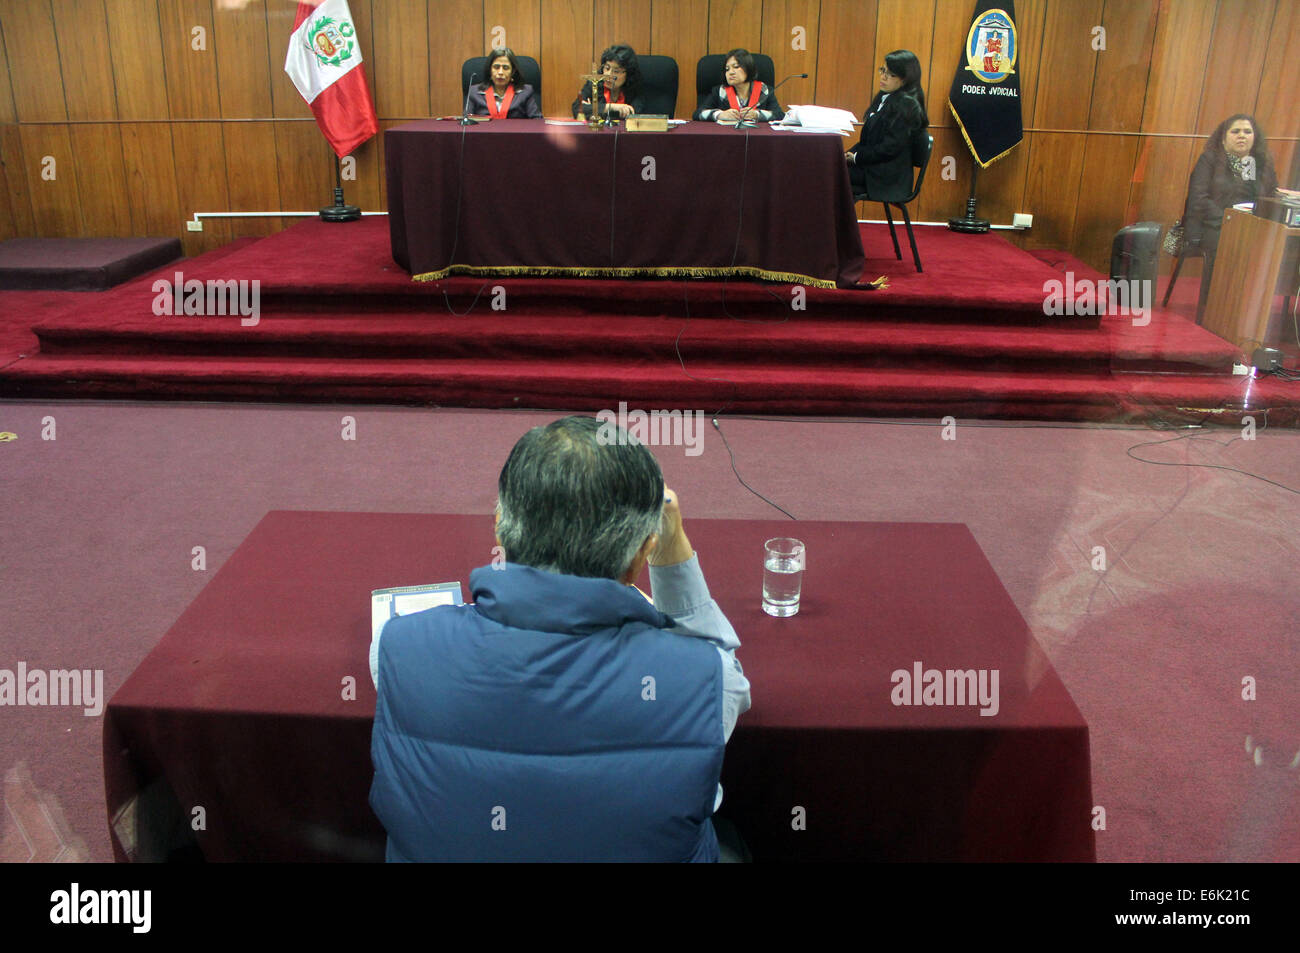 Lima, Peru. 25th Aug, 2014. Former Peruvian President Alberto Fujimori (front) attends his trial on the 'Chicha Newspapers' case, at the Direction of Special Operations of National Police (DINOES, for its acronym in Spanish), in Lima City, capital of Peru, on Aug. 25, 2014. The hearing of Fujimori's trial on the buying of notes of different newspapers with the State money, known as 'Chicha Newspapers' case, was held at the Fourth Liquidator Penal Hall of Lima's Higher Court of Justice, according to local press. © Luis Camacho/Xinhua/Alamy Live News Stock Photo